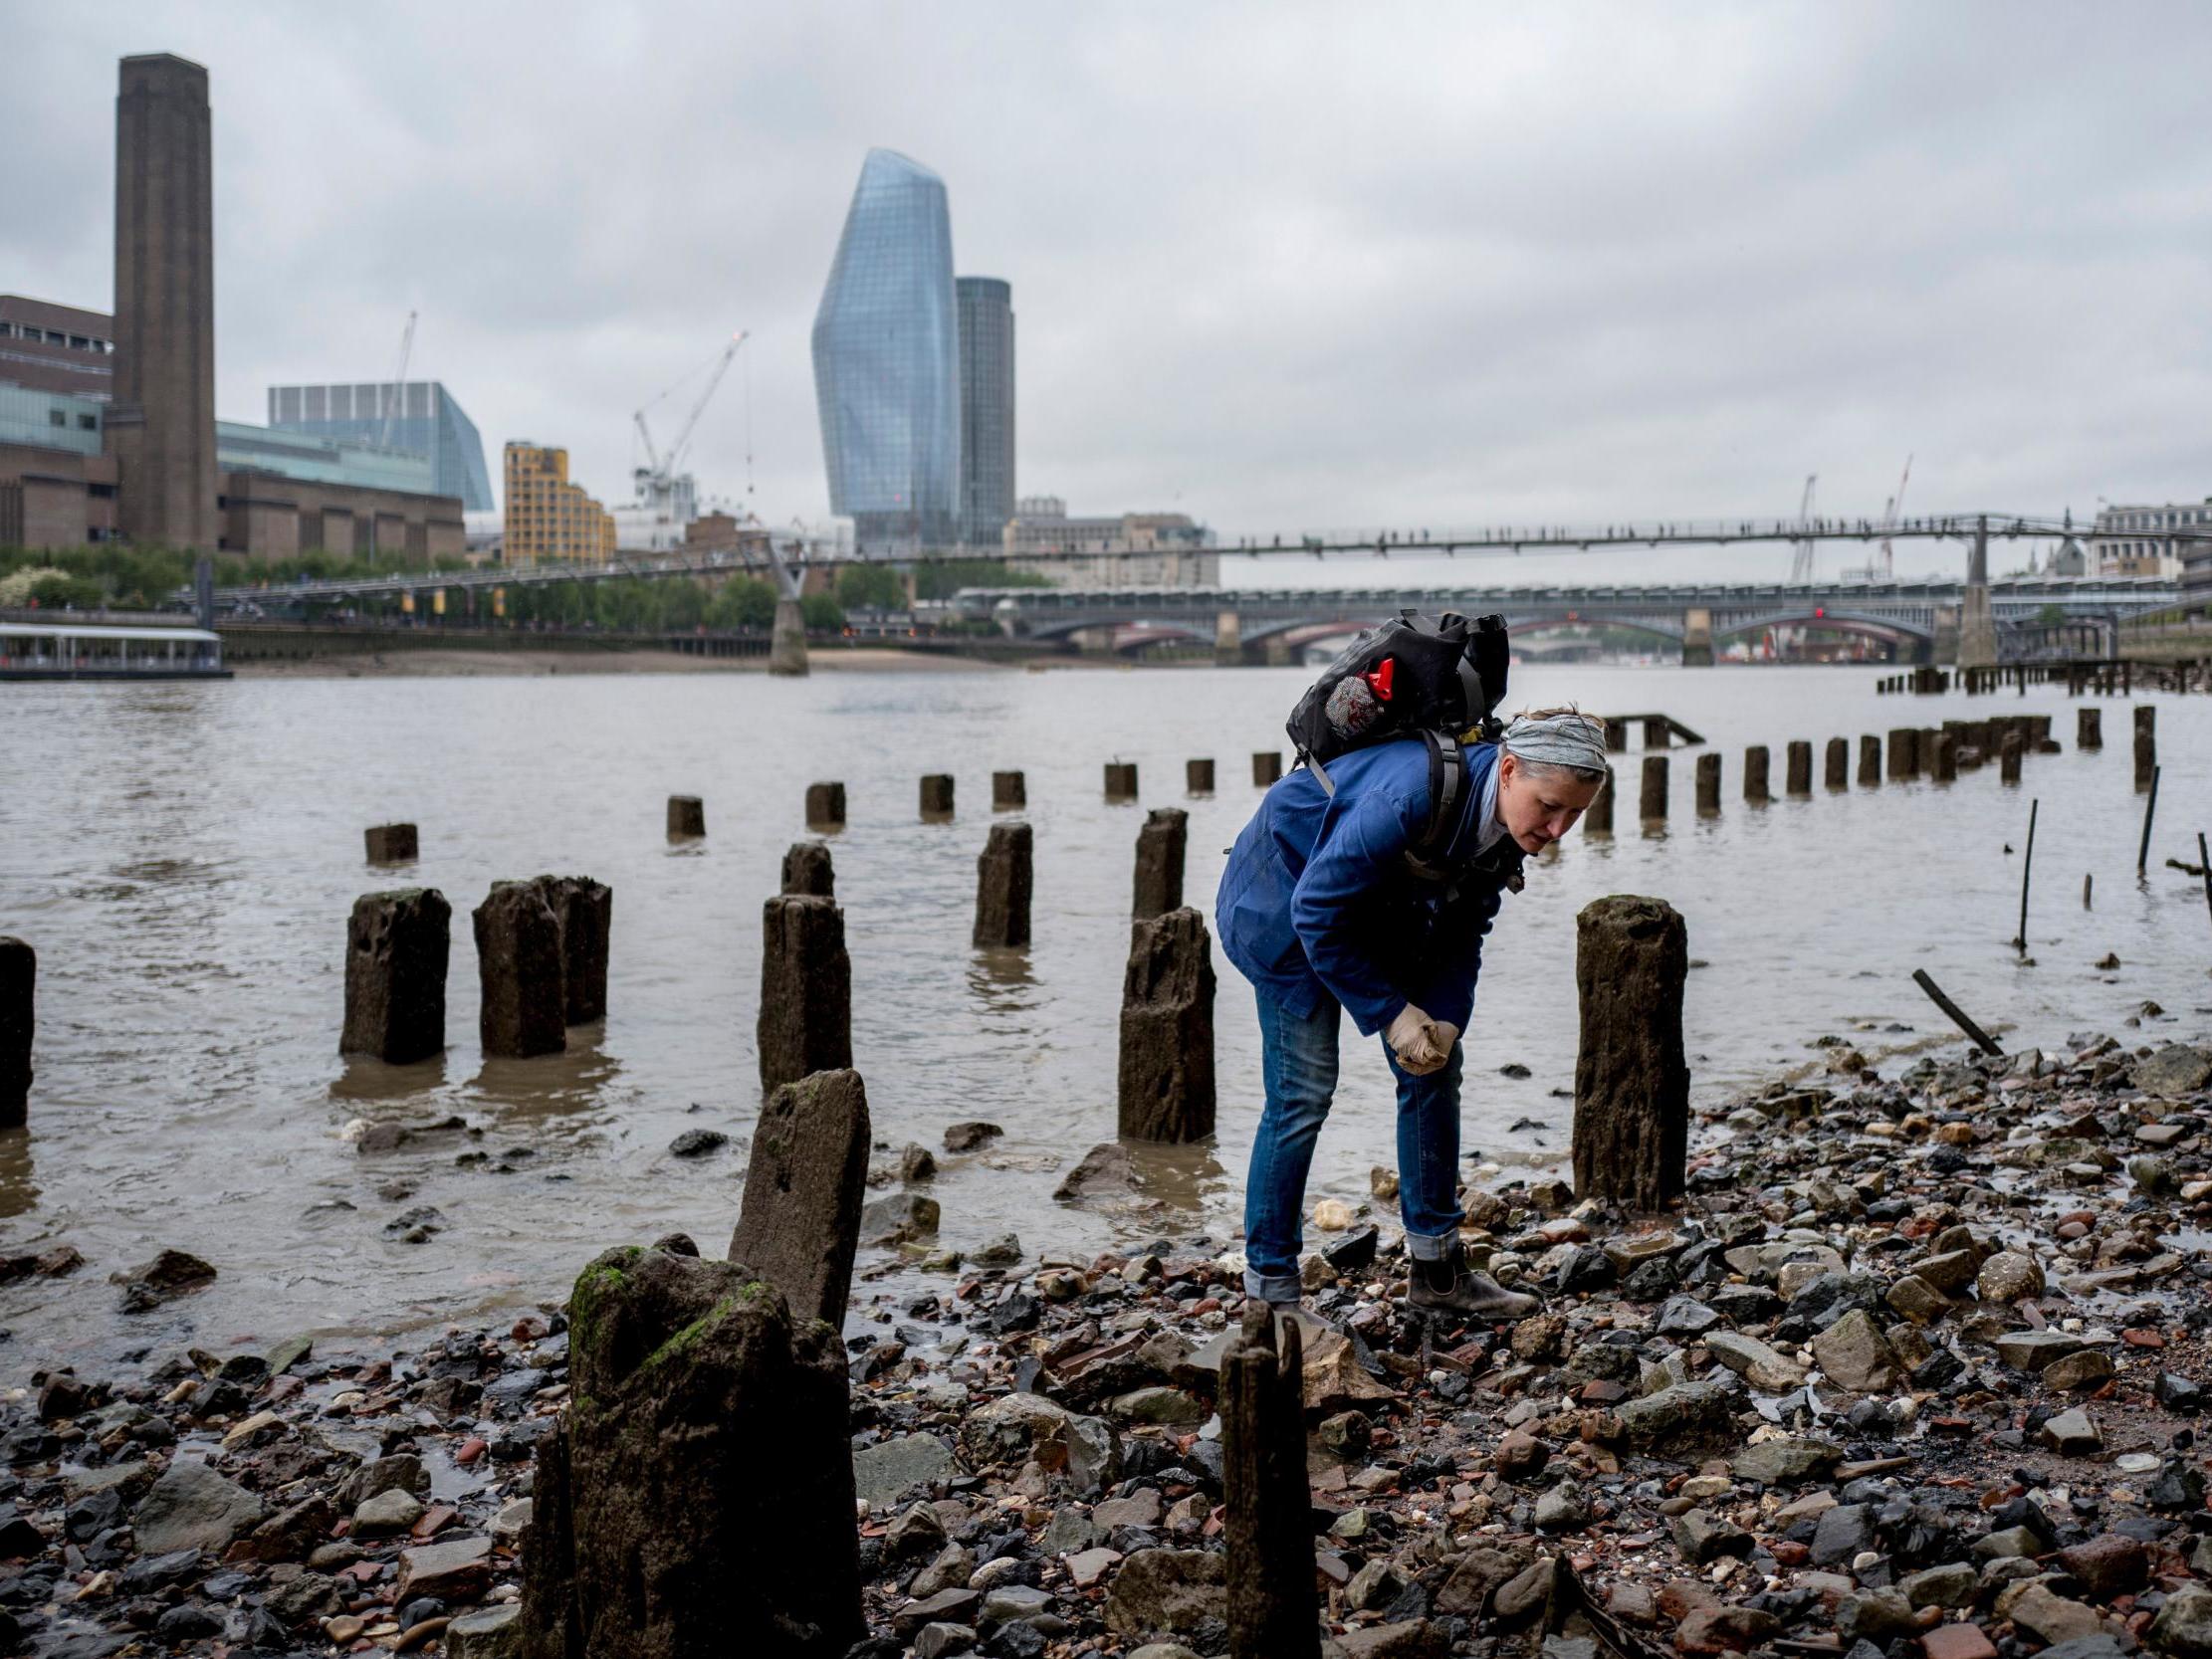 Unearthing Londons buried secrets along the shores of the Thames The Independent The Independent